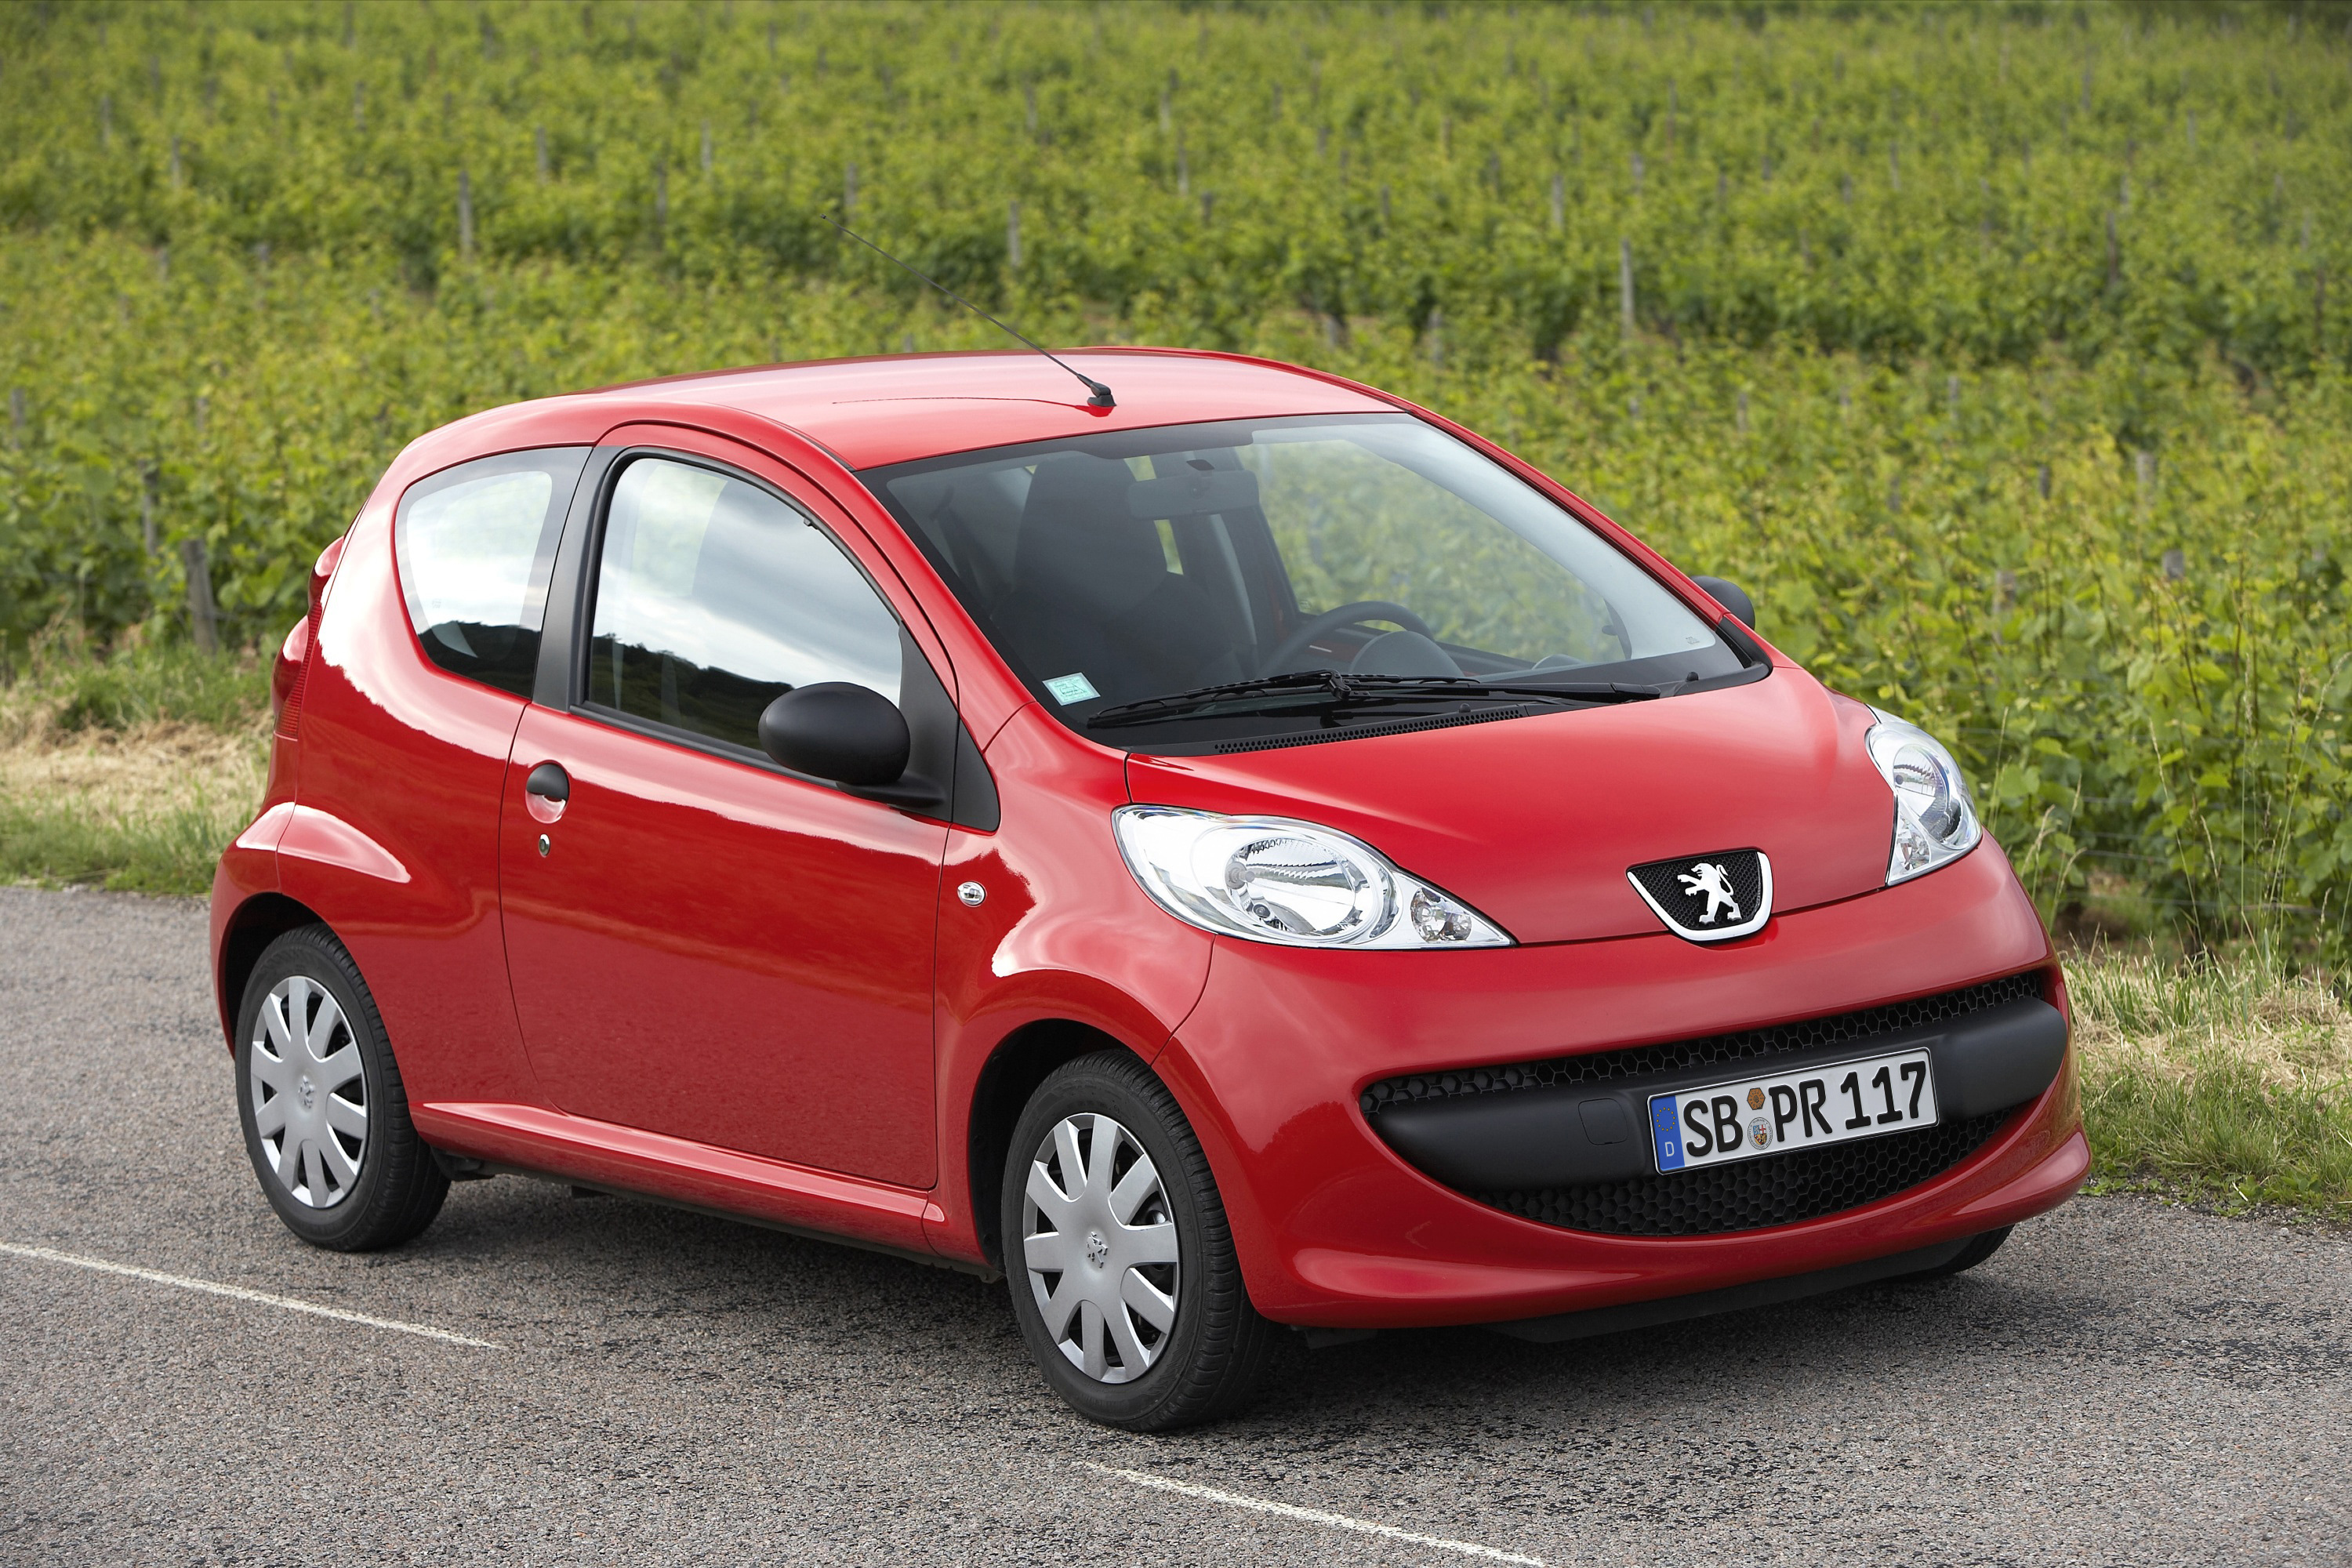 Peugeot 107 2008 Review, Amazing Pictures and Images